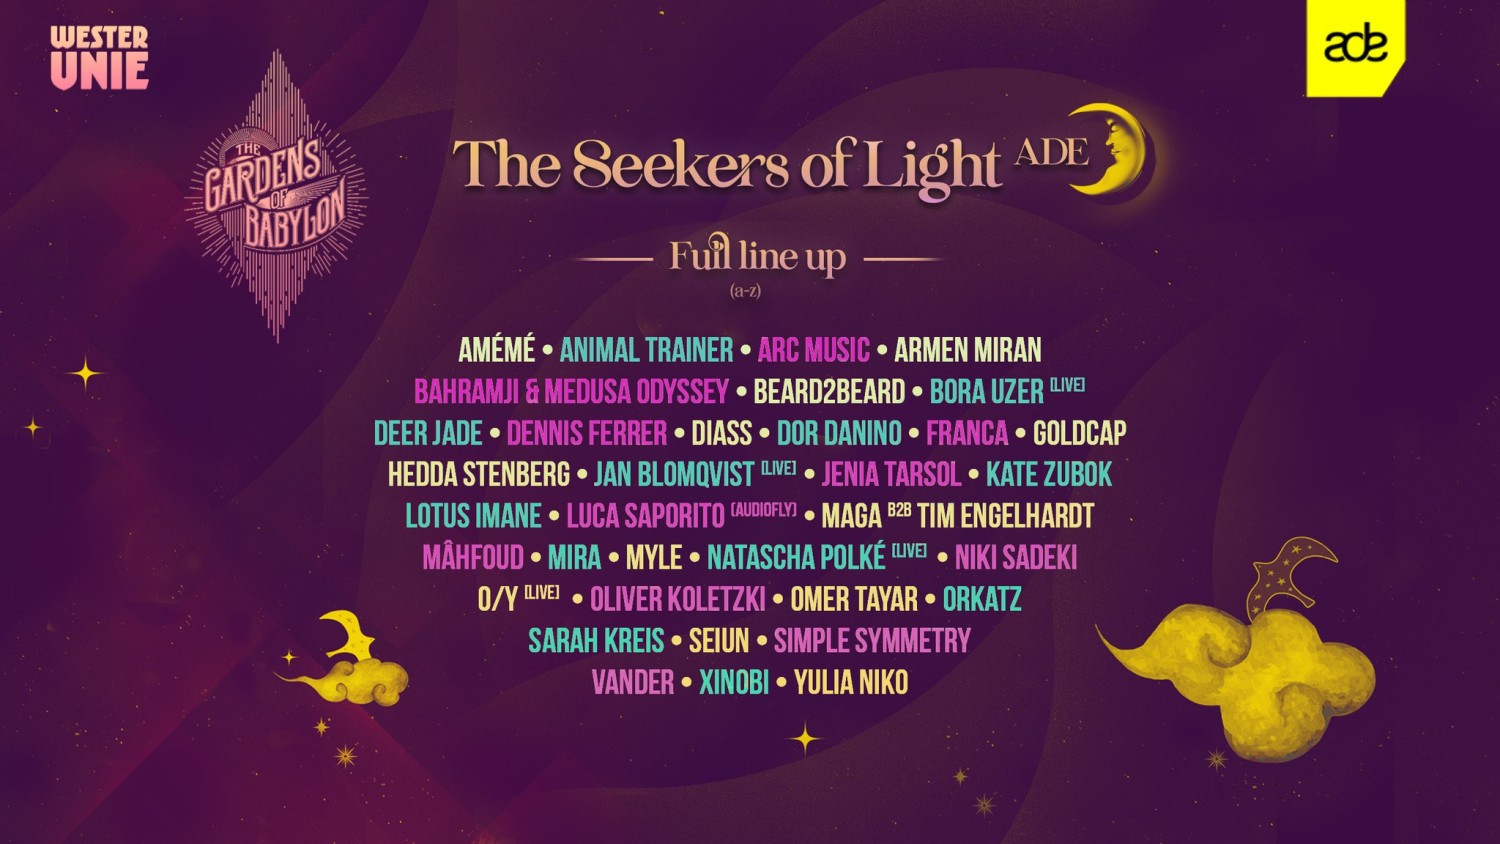 The Seekers of Light ADE